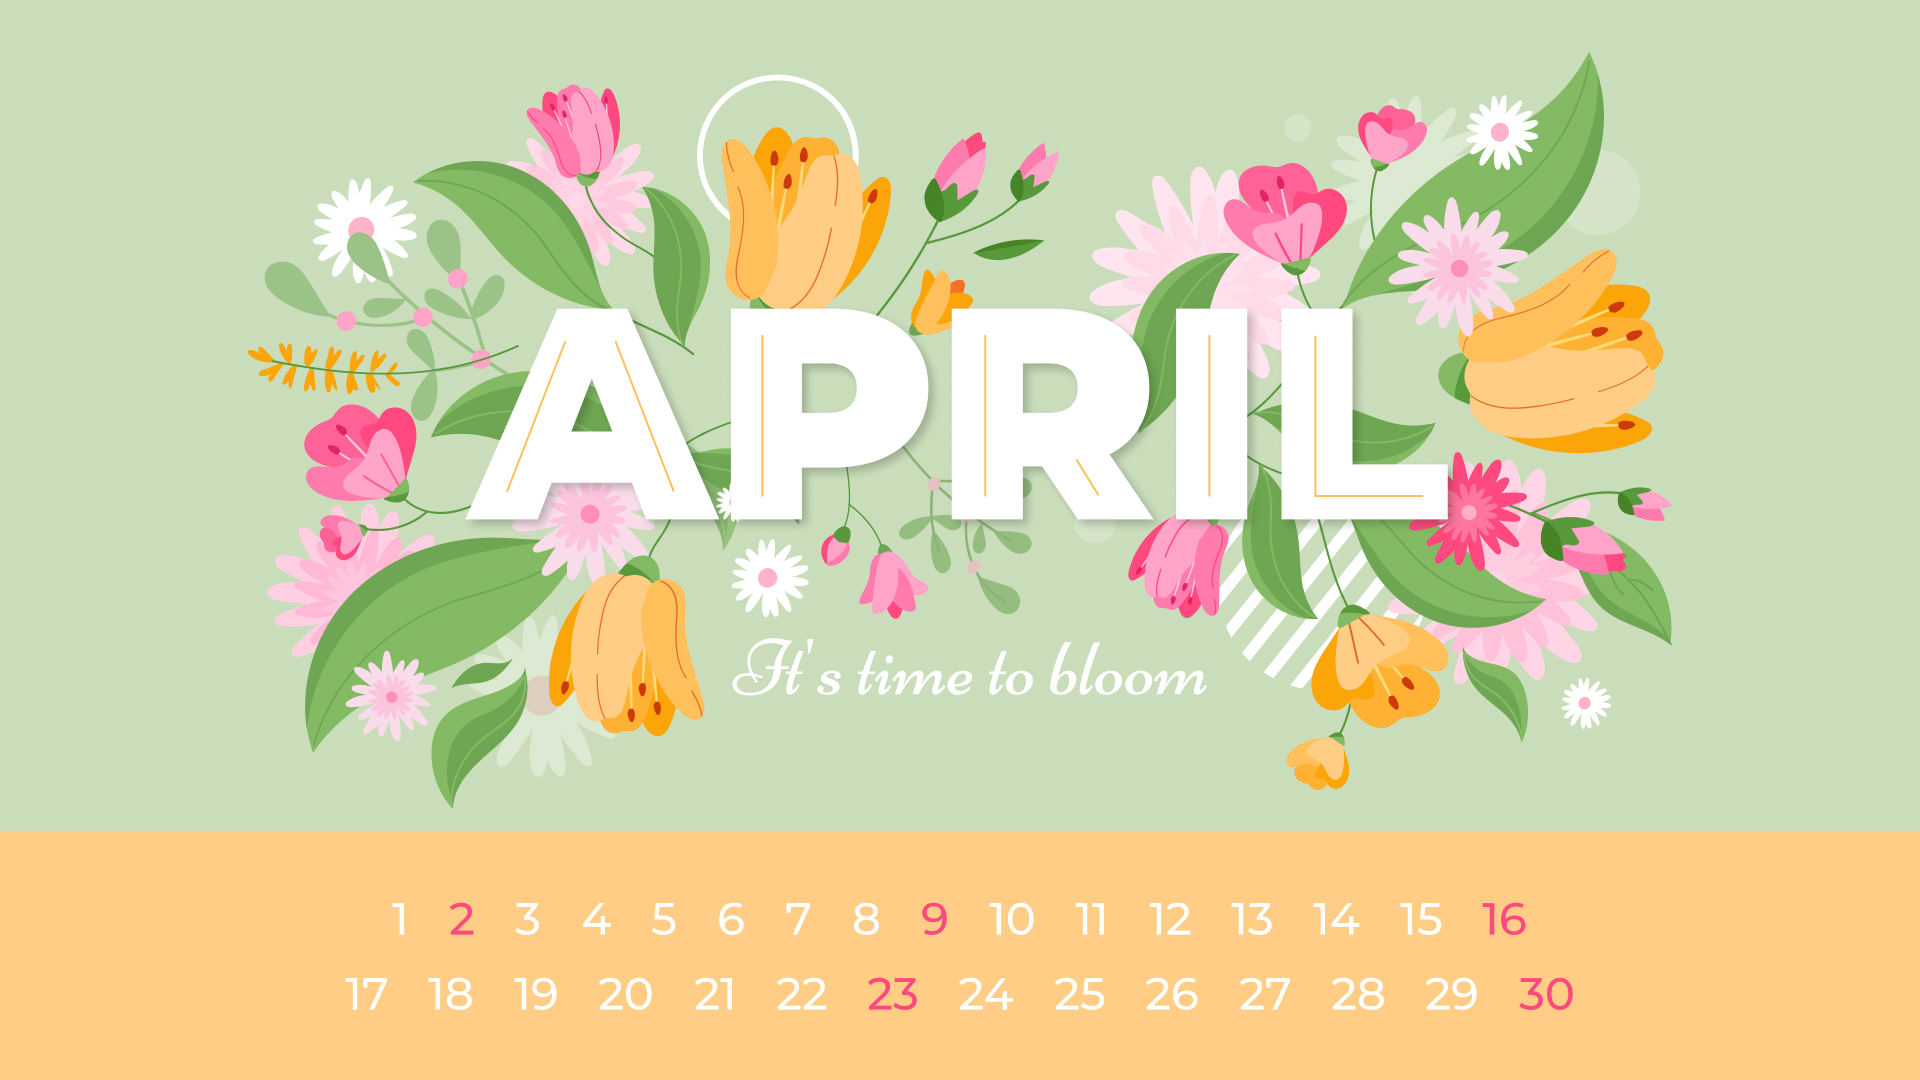 Calendar with flowers and leaves on it.